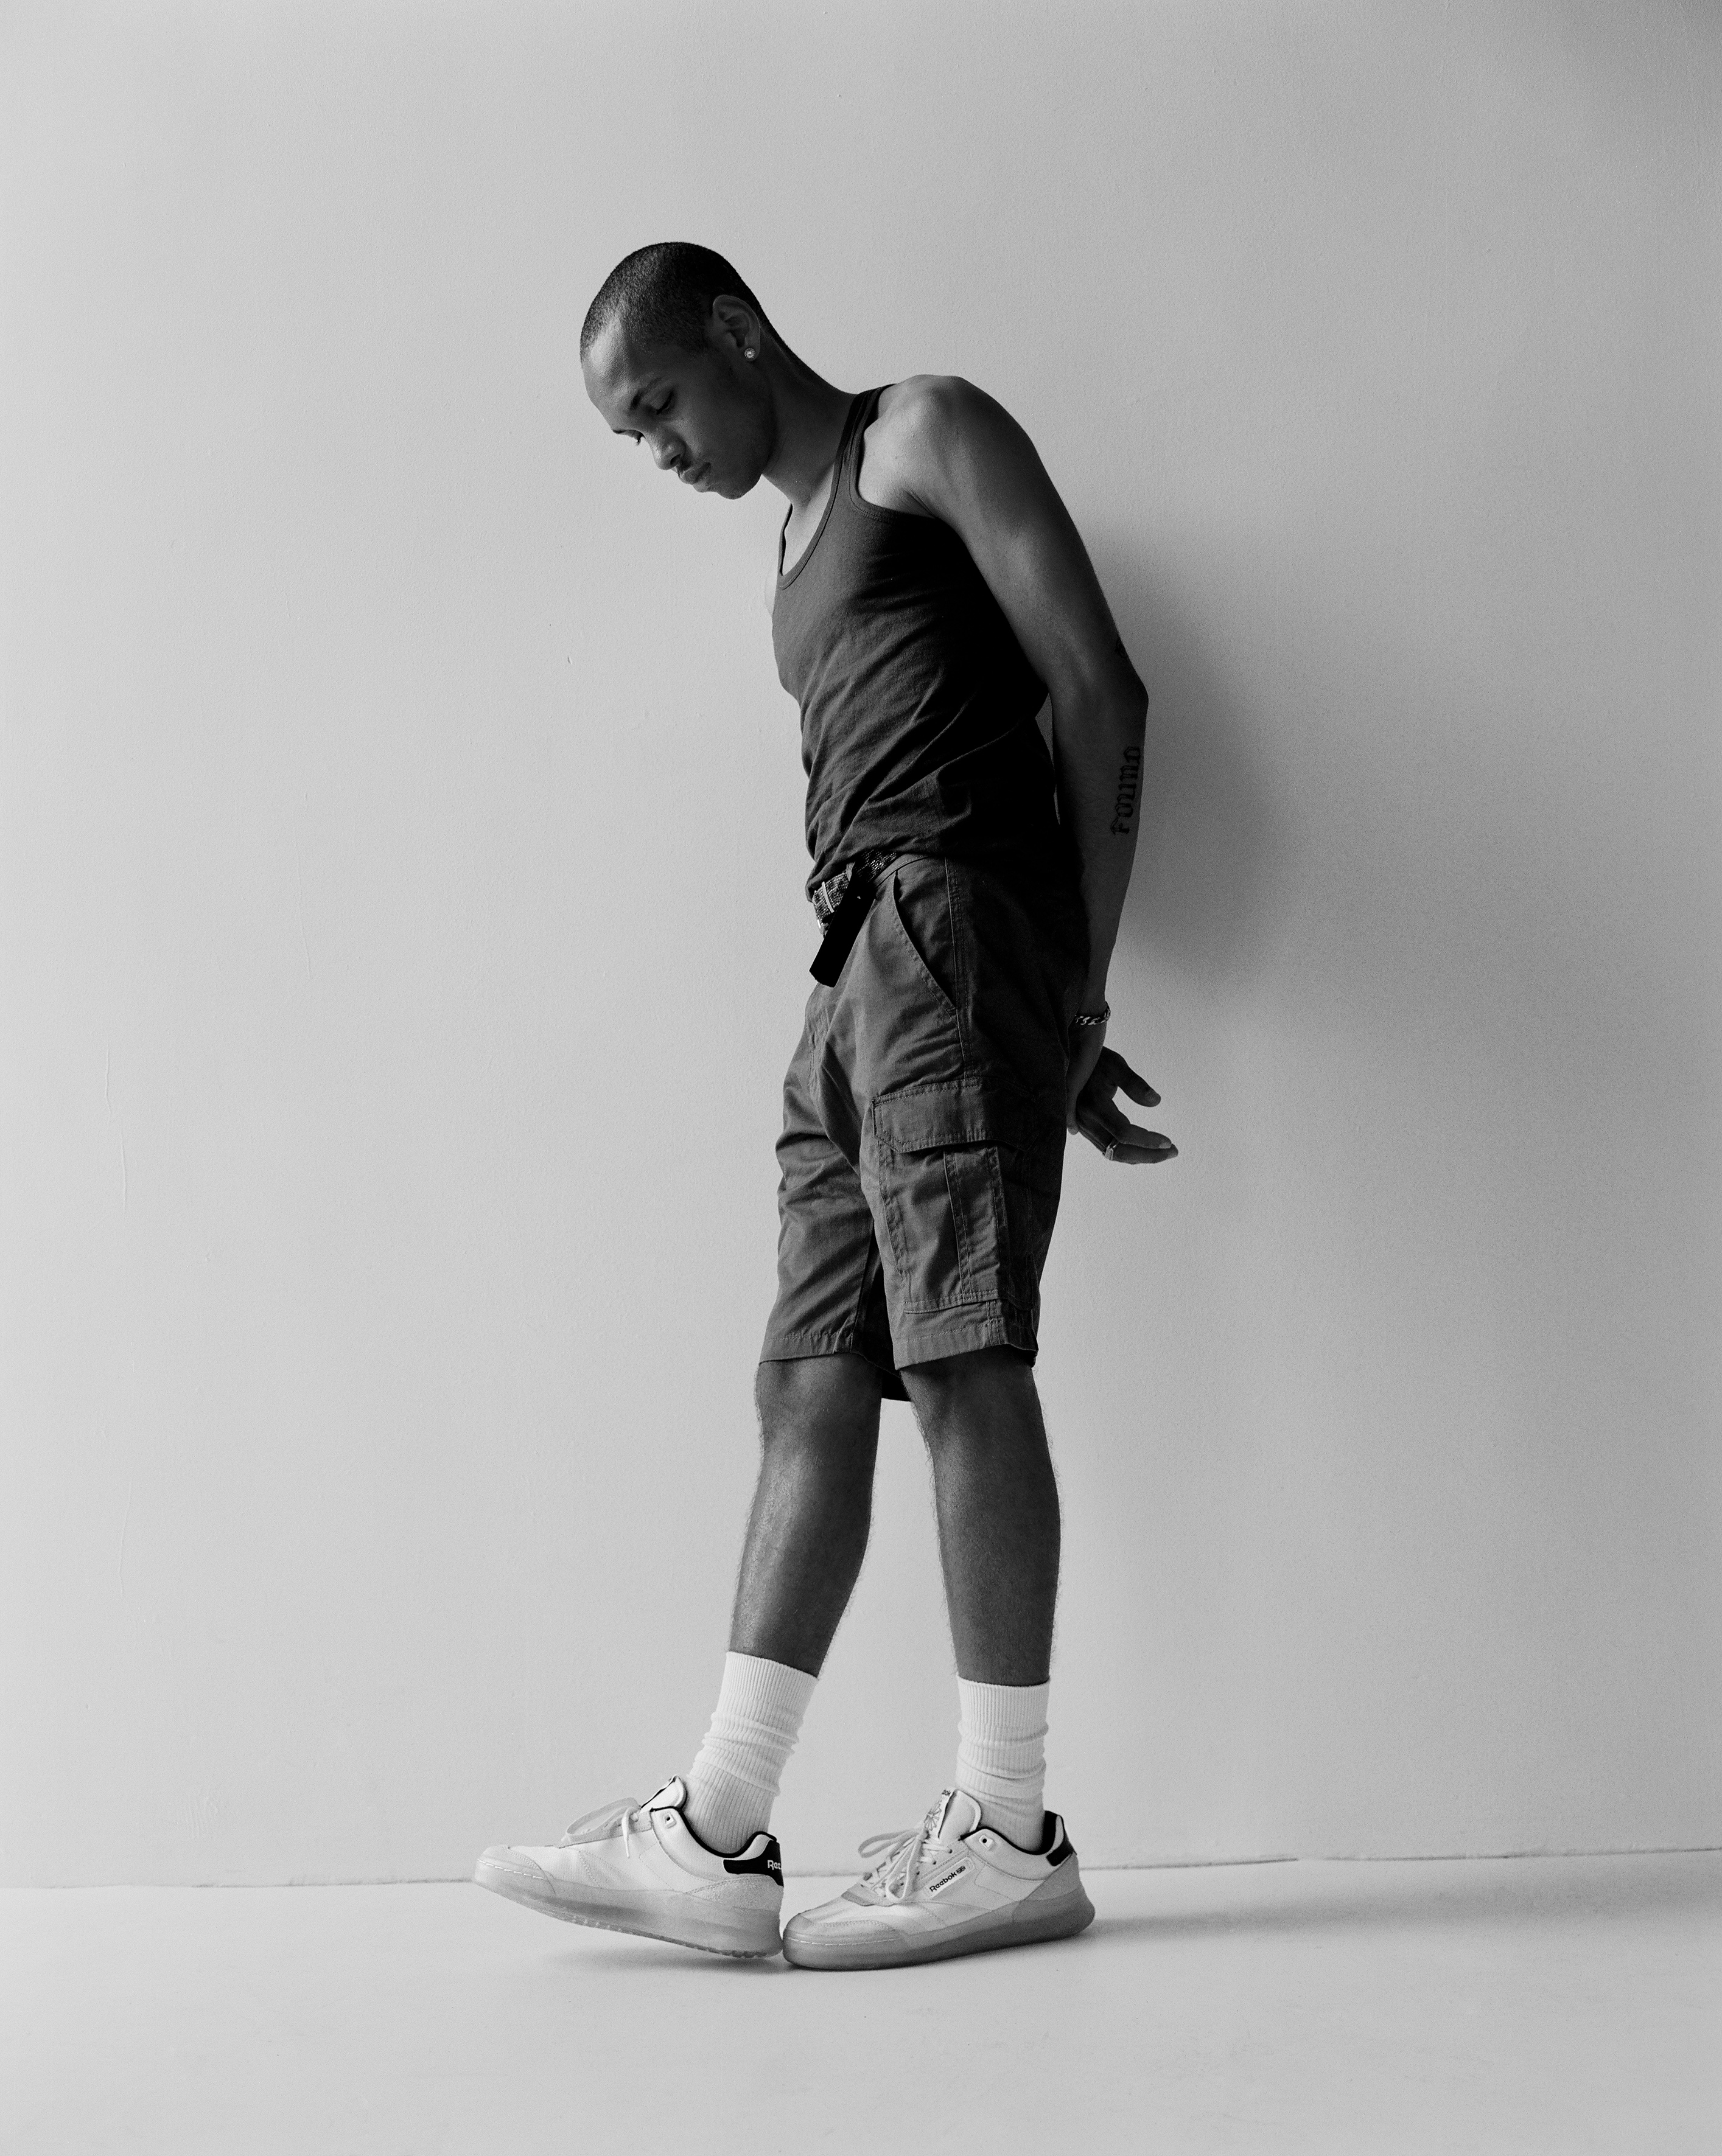 Tyrus stands in front of a white wall. They wear white reeboks with white socks, knee length utility shorts, a belt, and a grey vest.